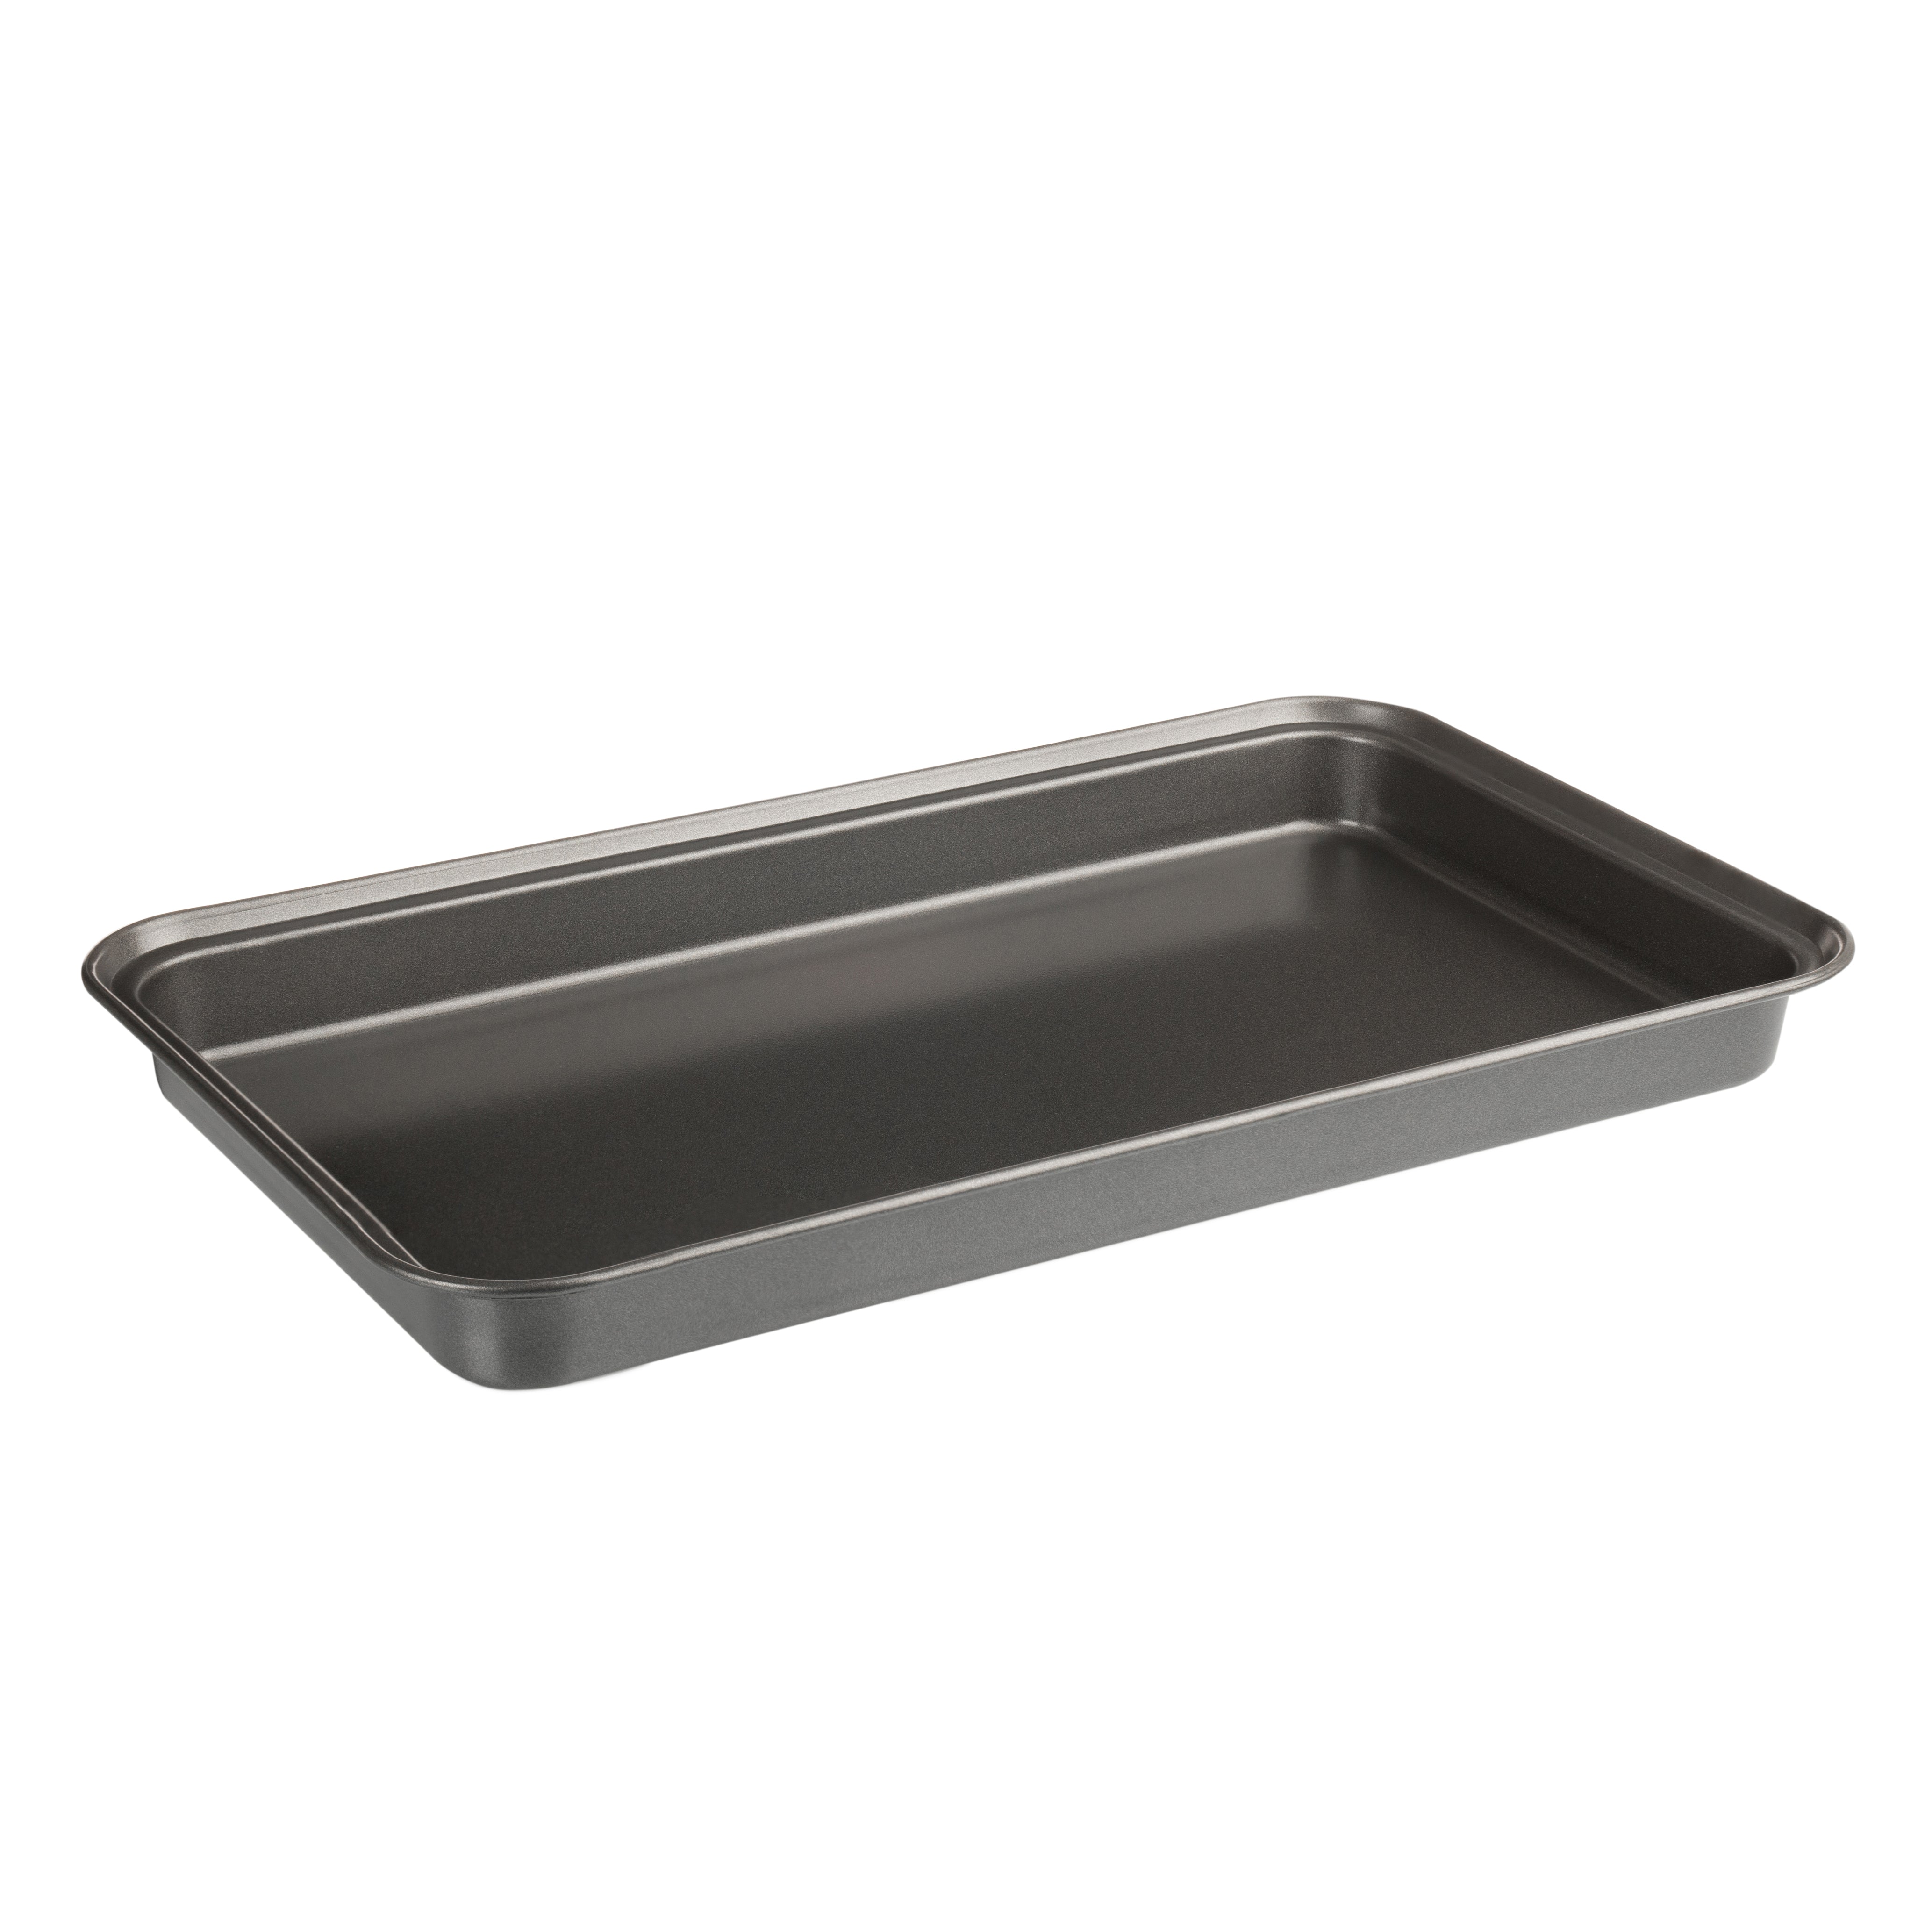 Luxe Kitchen Professional Quality Brownie Baking Cake Pan 34cm x 20cm x 3.5cm - The Cooks Cupboard Ltd